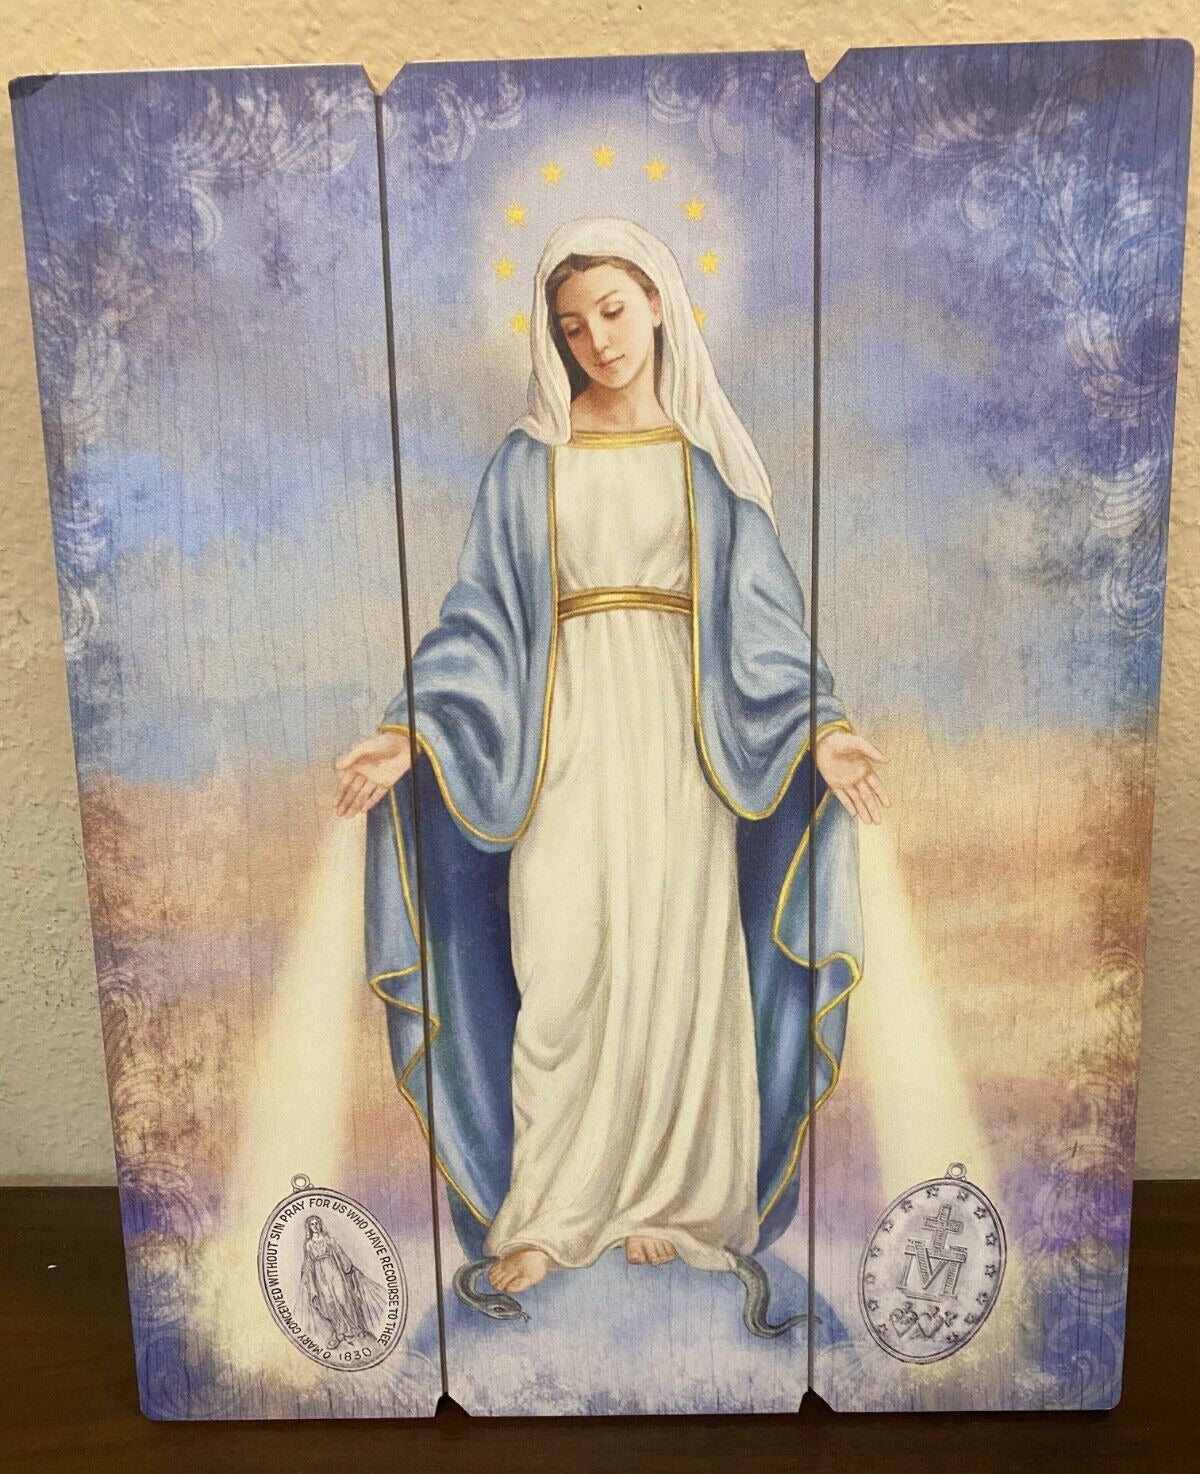 Our Lady of the Miraculous Medal Image on Wood Pallet, New